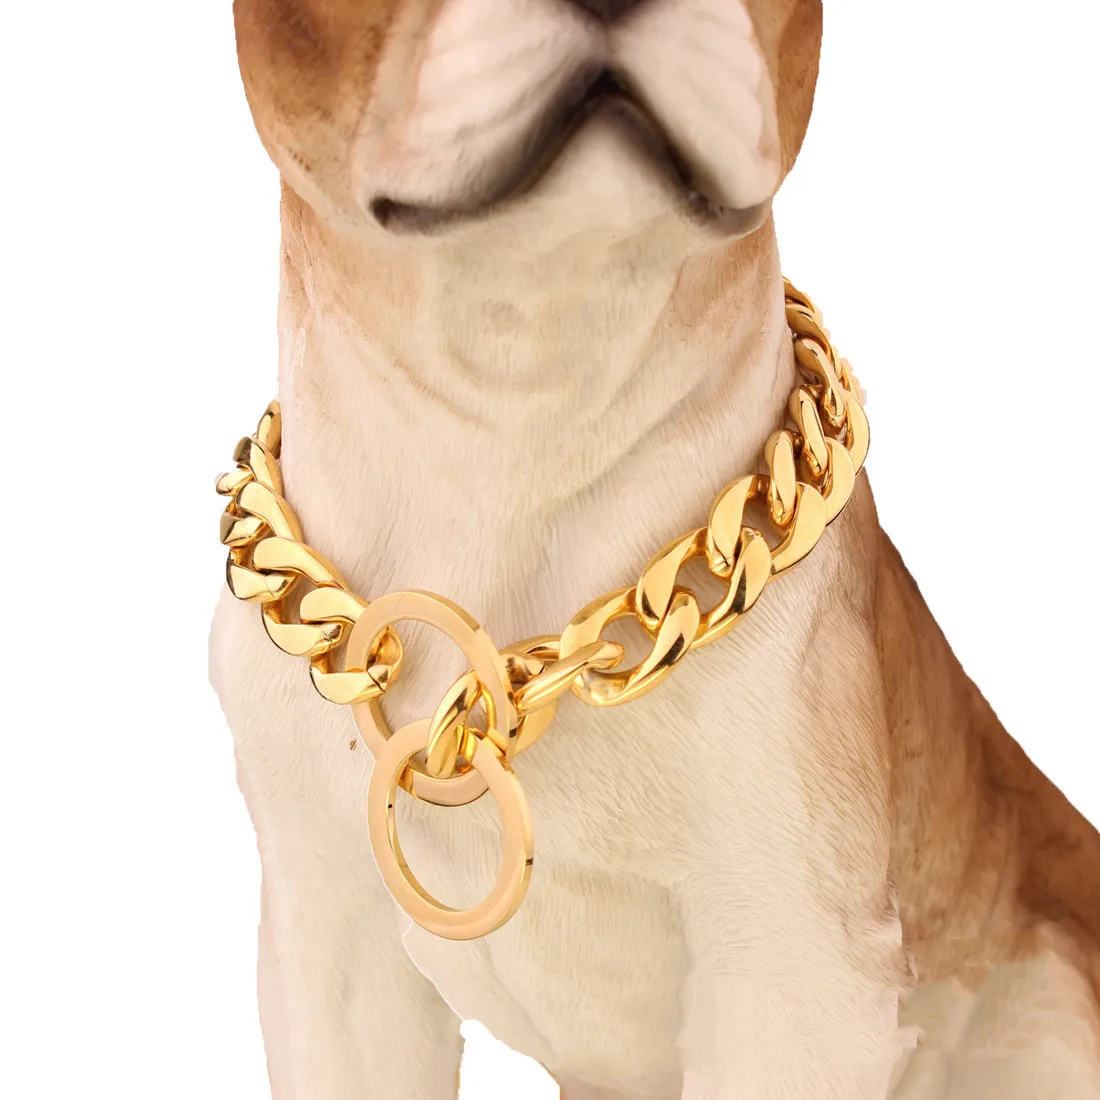 Supper Cute Dog Neck Chain Gold Color/ Jewelry for Pet /jewelry Collar for  Frenchie/ - Etsy | Cute dogs, Cute puppies, Cute dogs and puppies